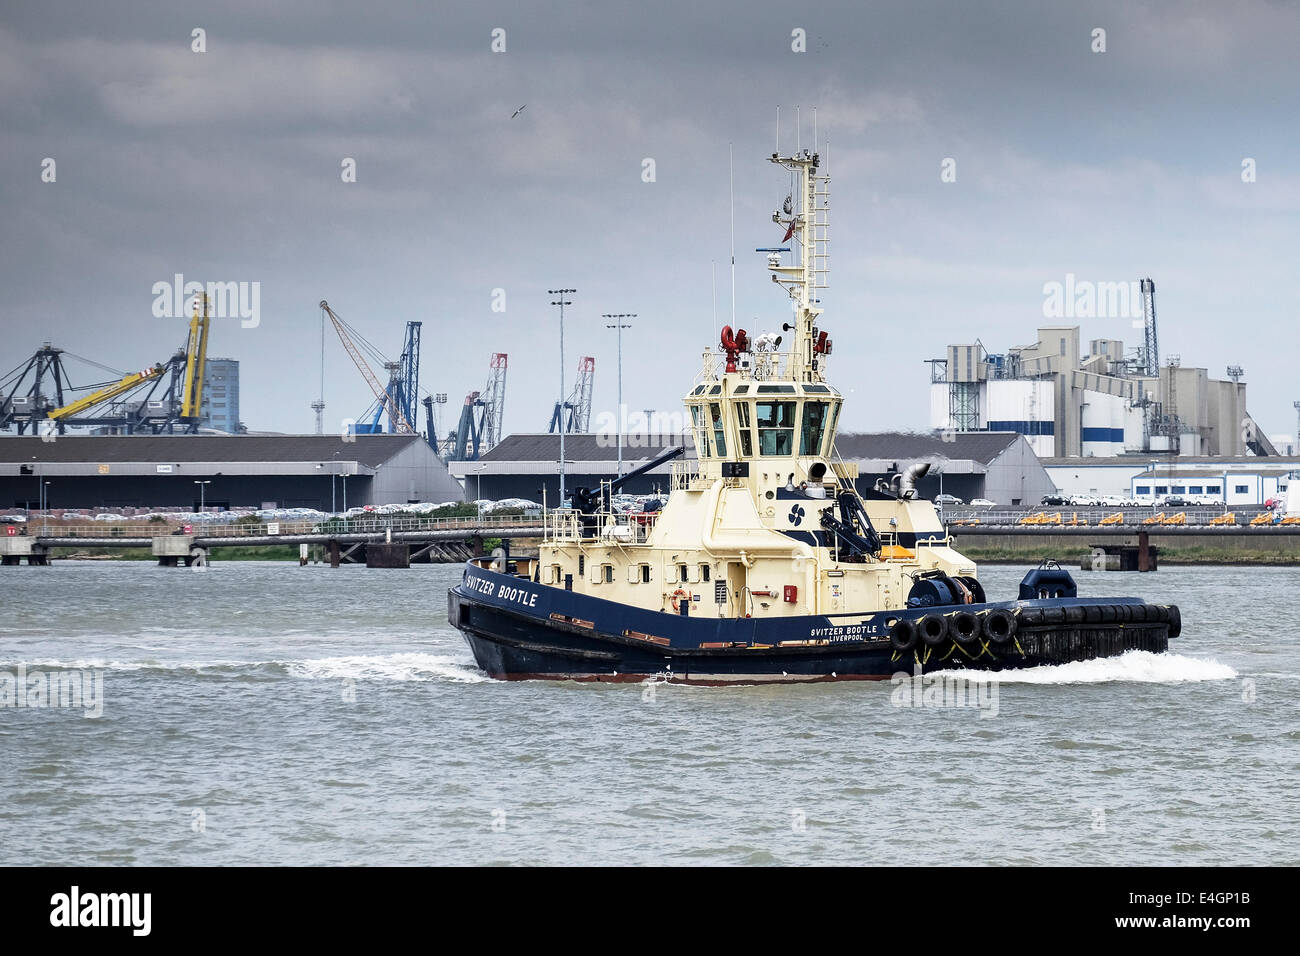 The tug Svitzer Bootle steaming downriver on the River Thames. Stock Photo